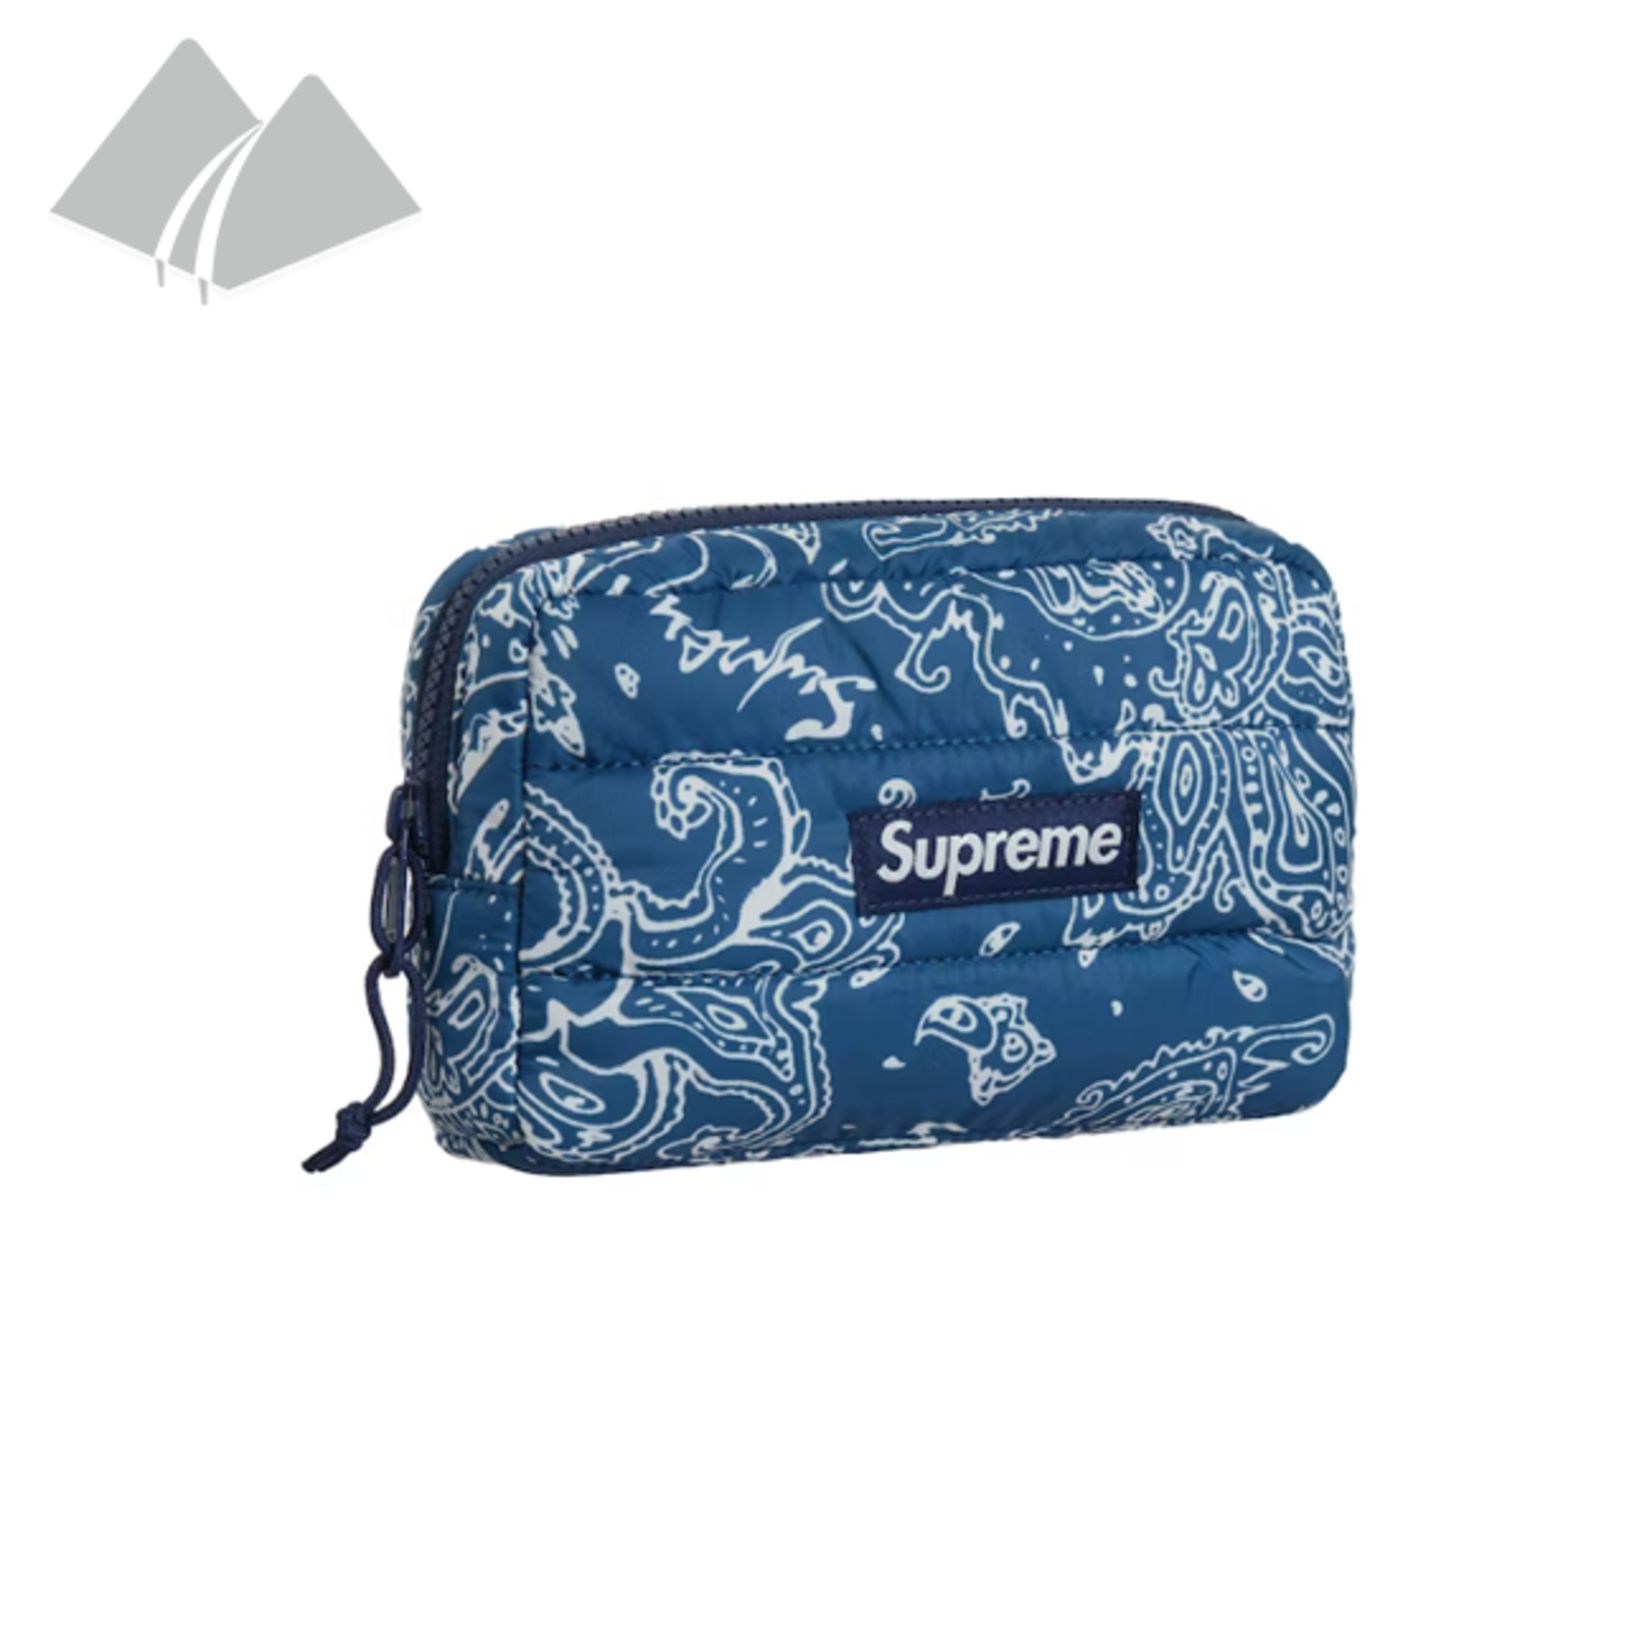 Supreme Supreme Puffer Pouch Blue Paisley - Vacaville